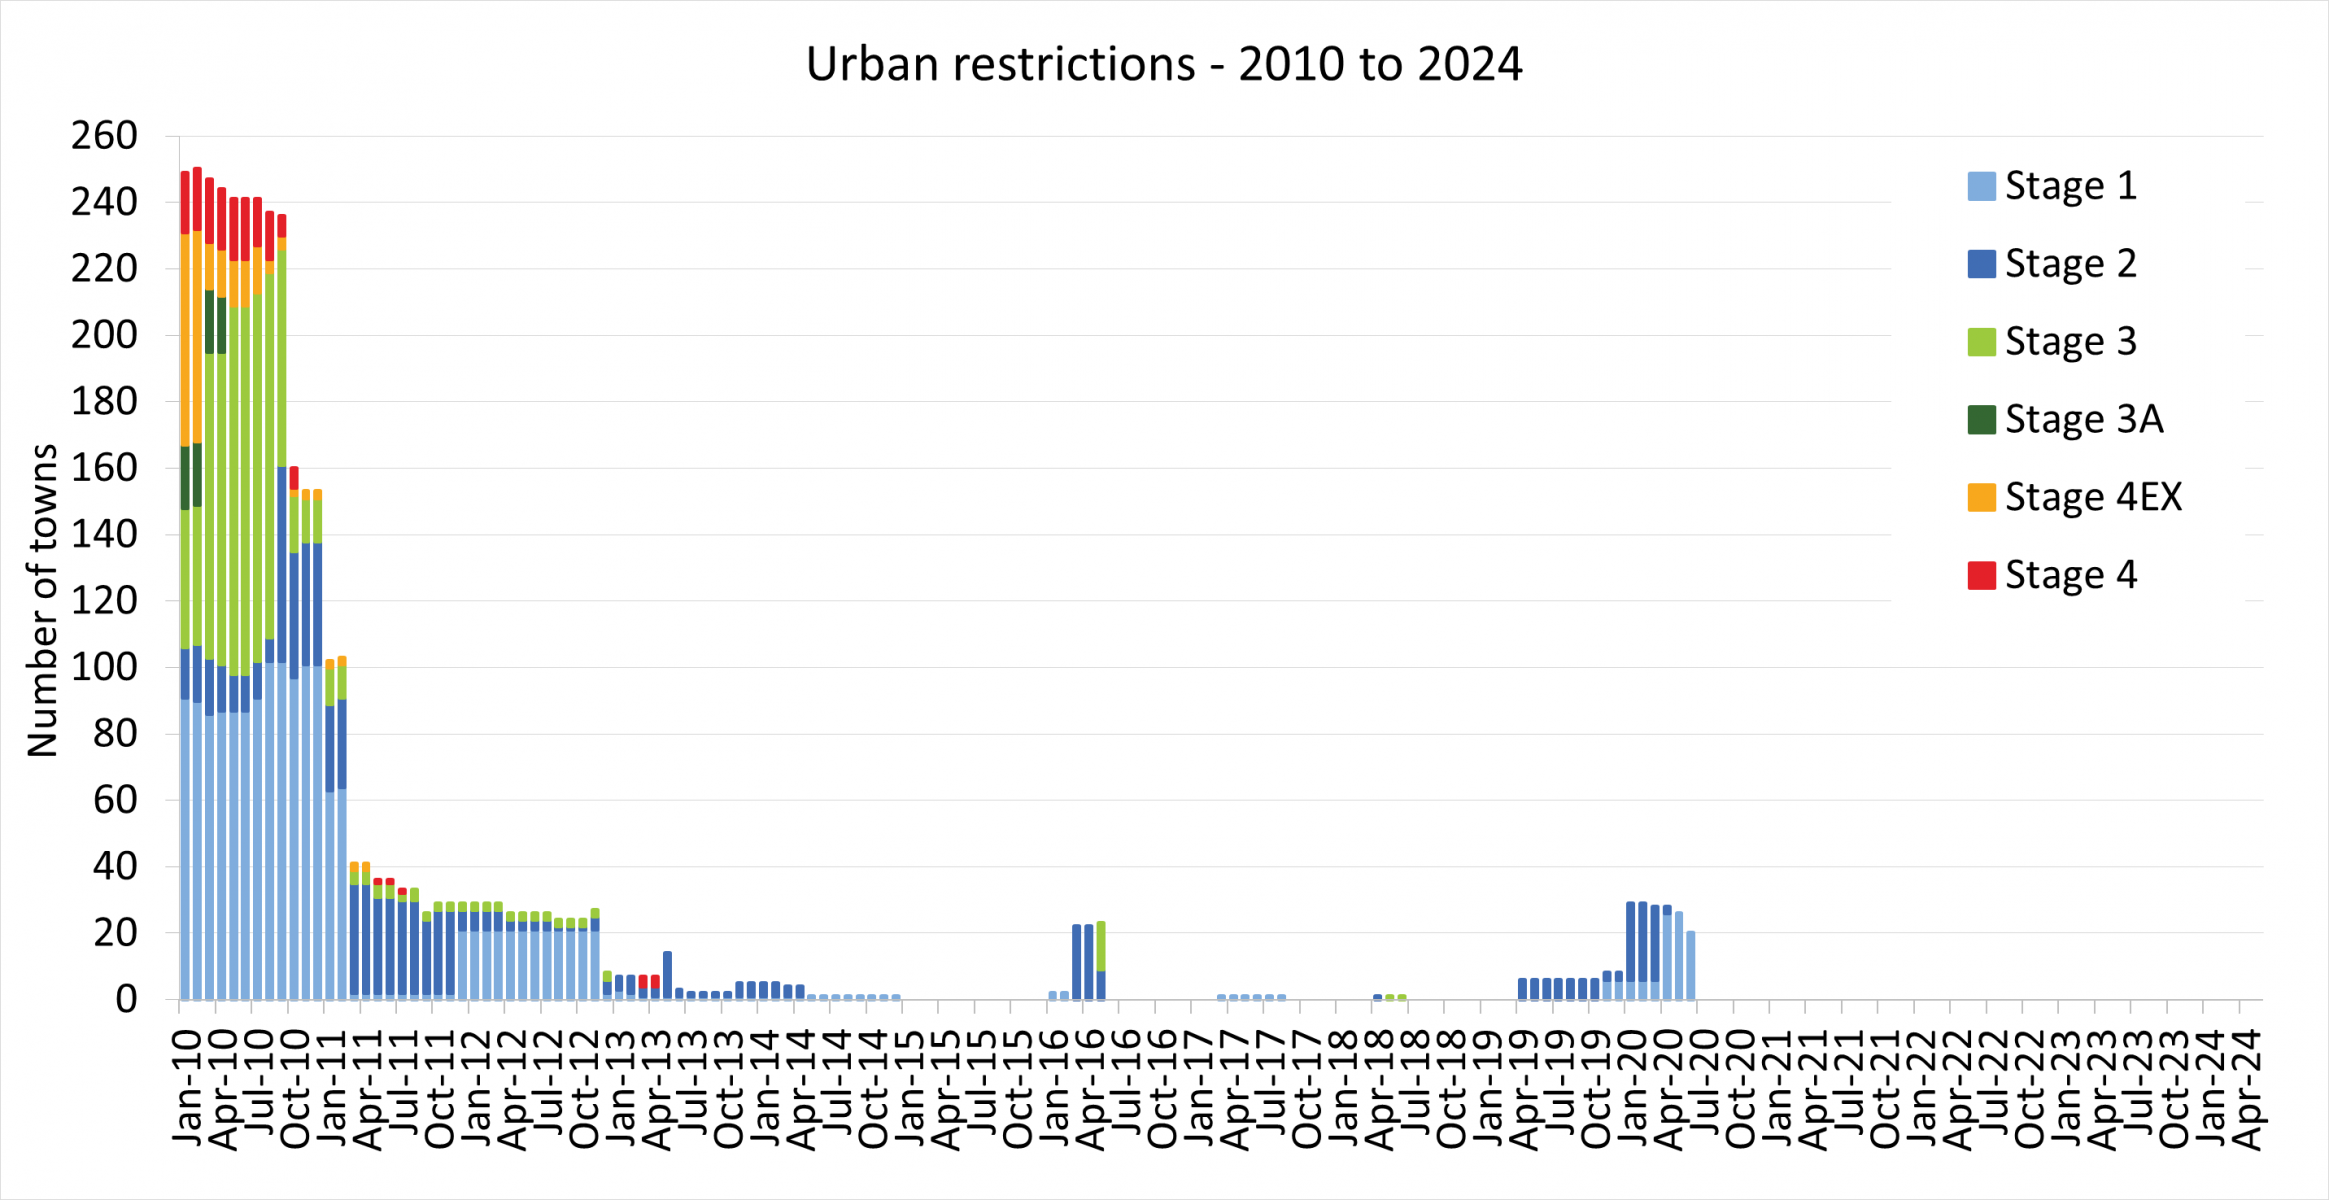 Graph of total number of towns on urban restrictions from January 2010 to May 2024